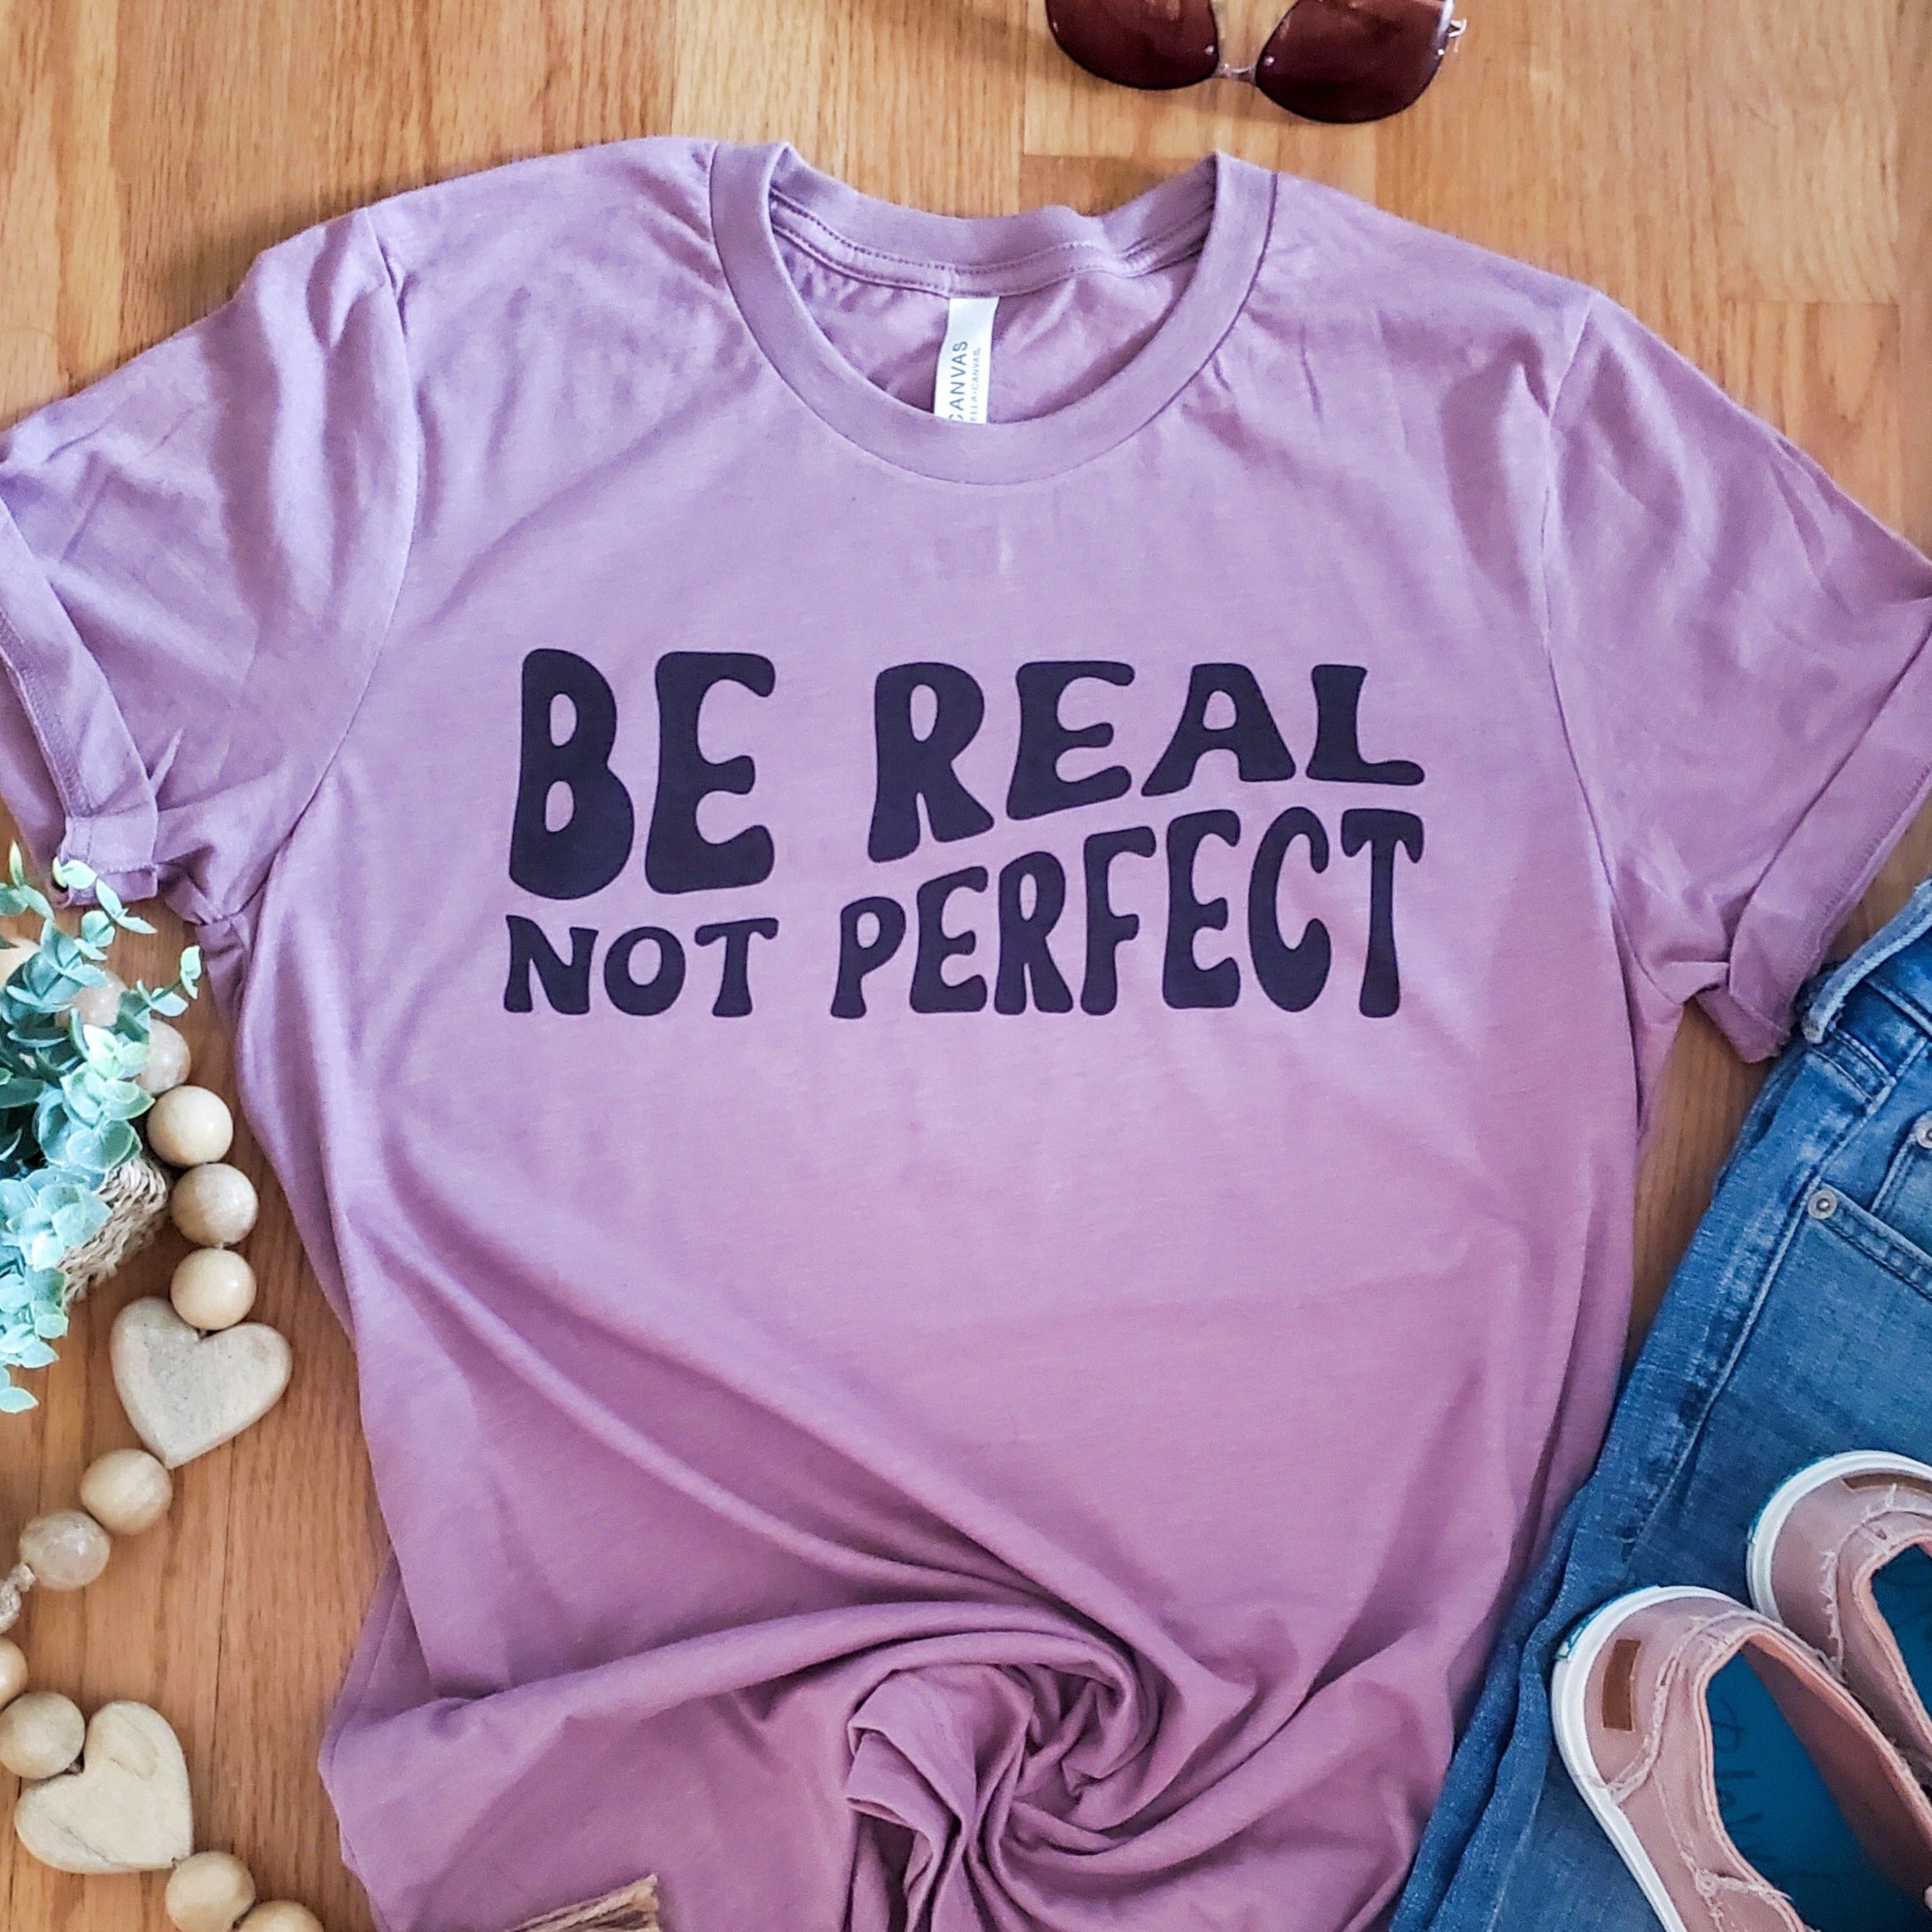 Be real not perfect tshirt